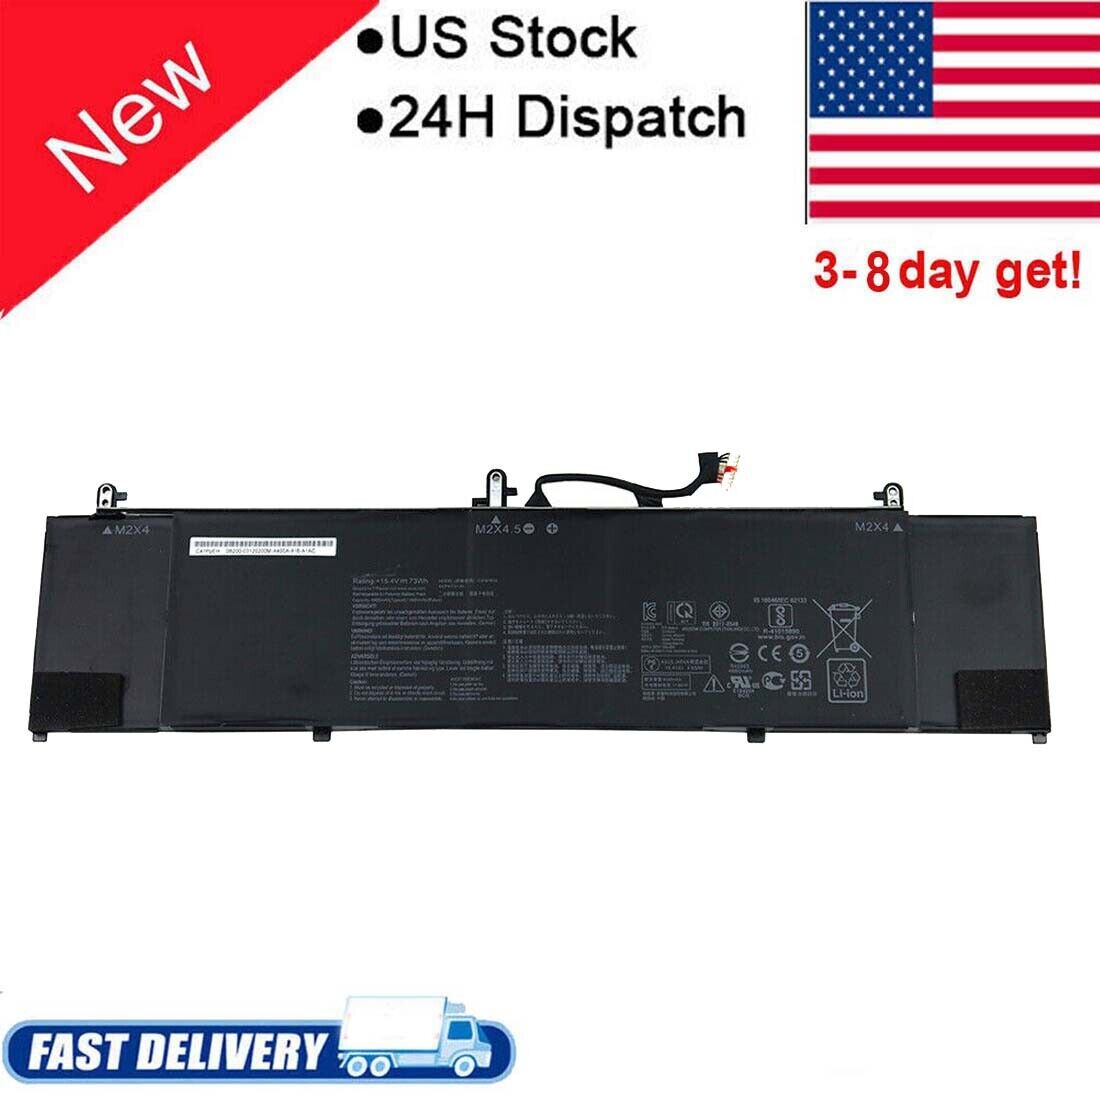 New C41N1814 73Wh Battery for Asus Zenbook 15 UX533 UX533FD UX533FN C41PpEH